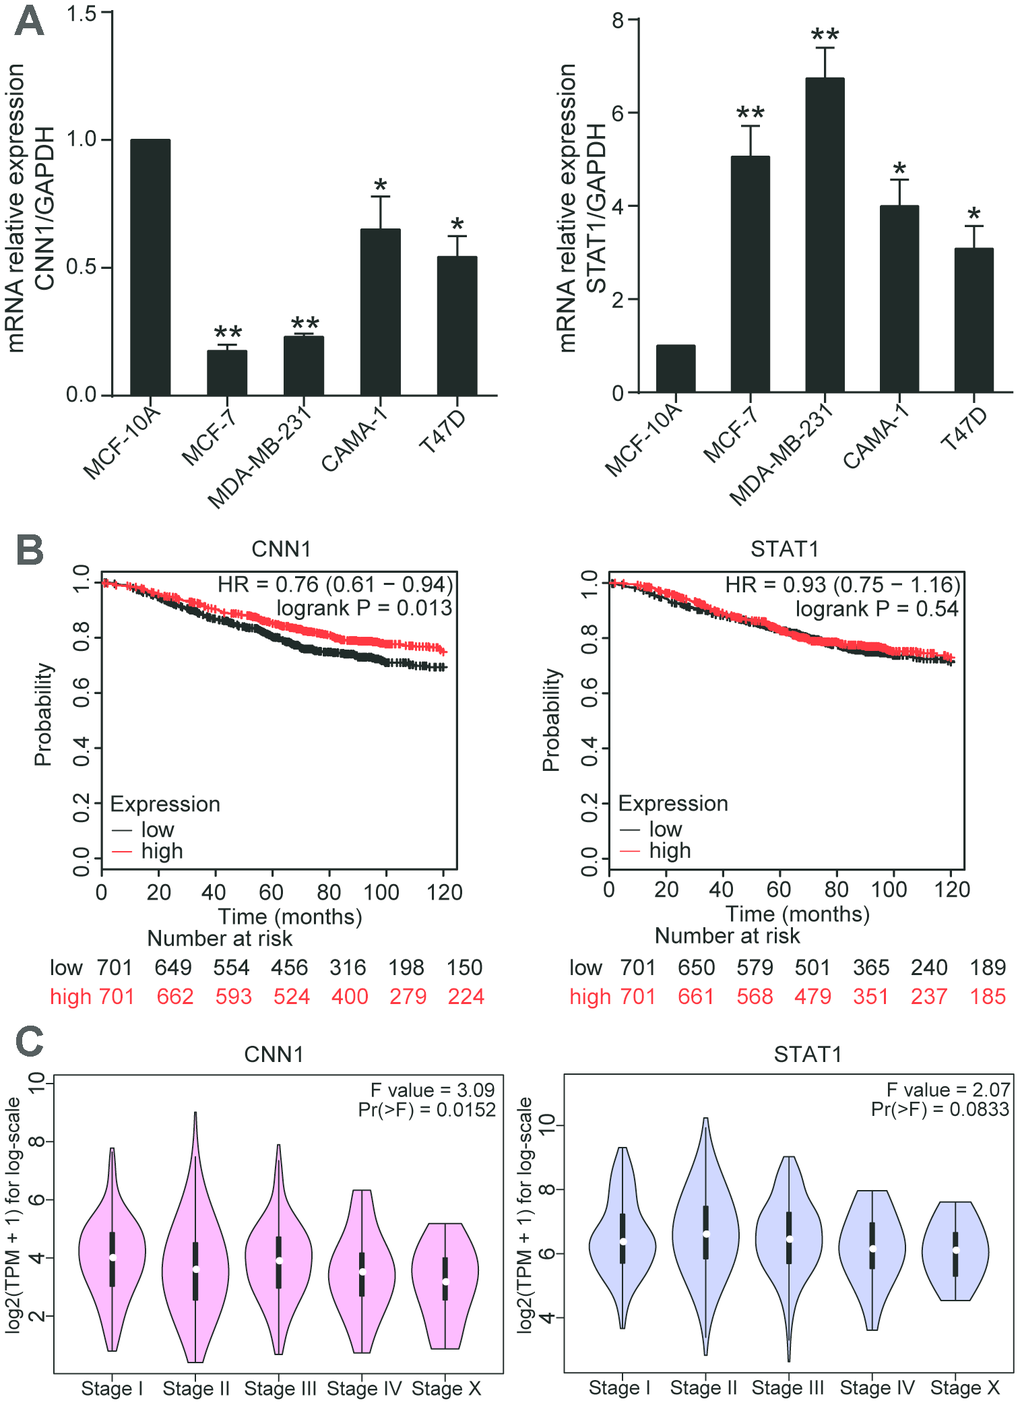 CNN1 played a key role in BRCA. (A) The mRNA expression of CNN1 was decreased in BRCA cells, while the mRNA expression of STAT1 was increased in BRCA cells. *PB) The effects of CNN1 and STAT1 on the prognosis of breast cancer. (C) The effects of CNNA and STAT1 on the stage of breast cancer.